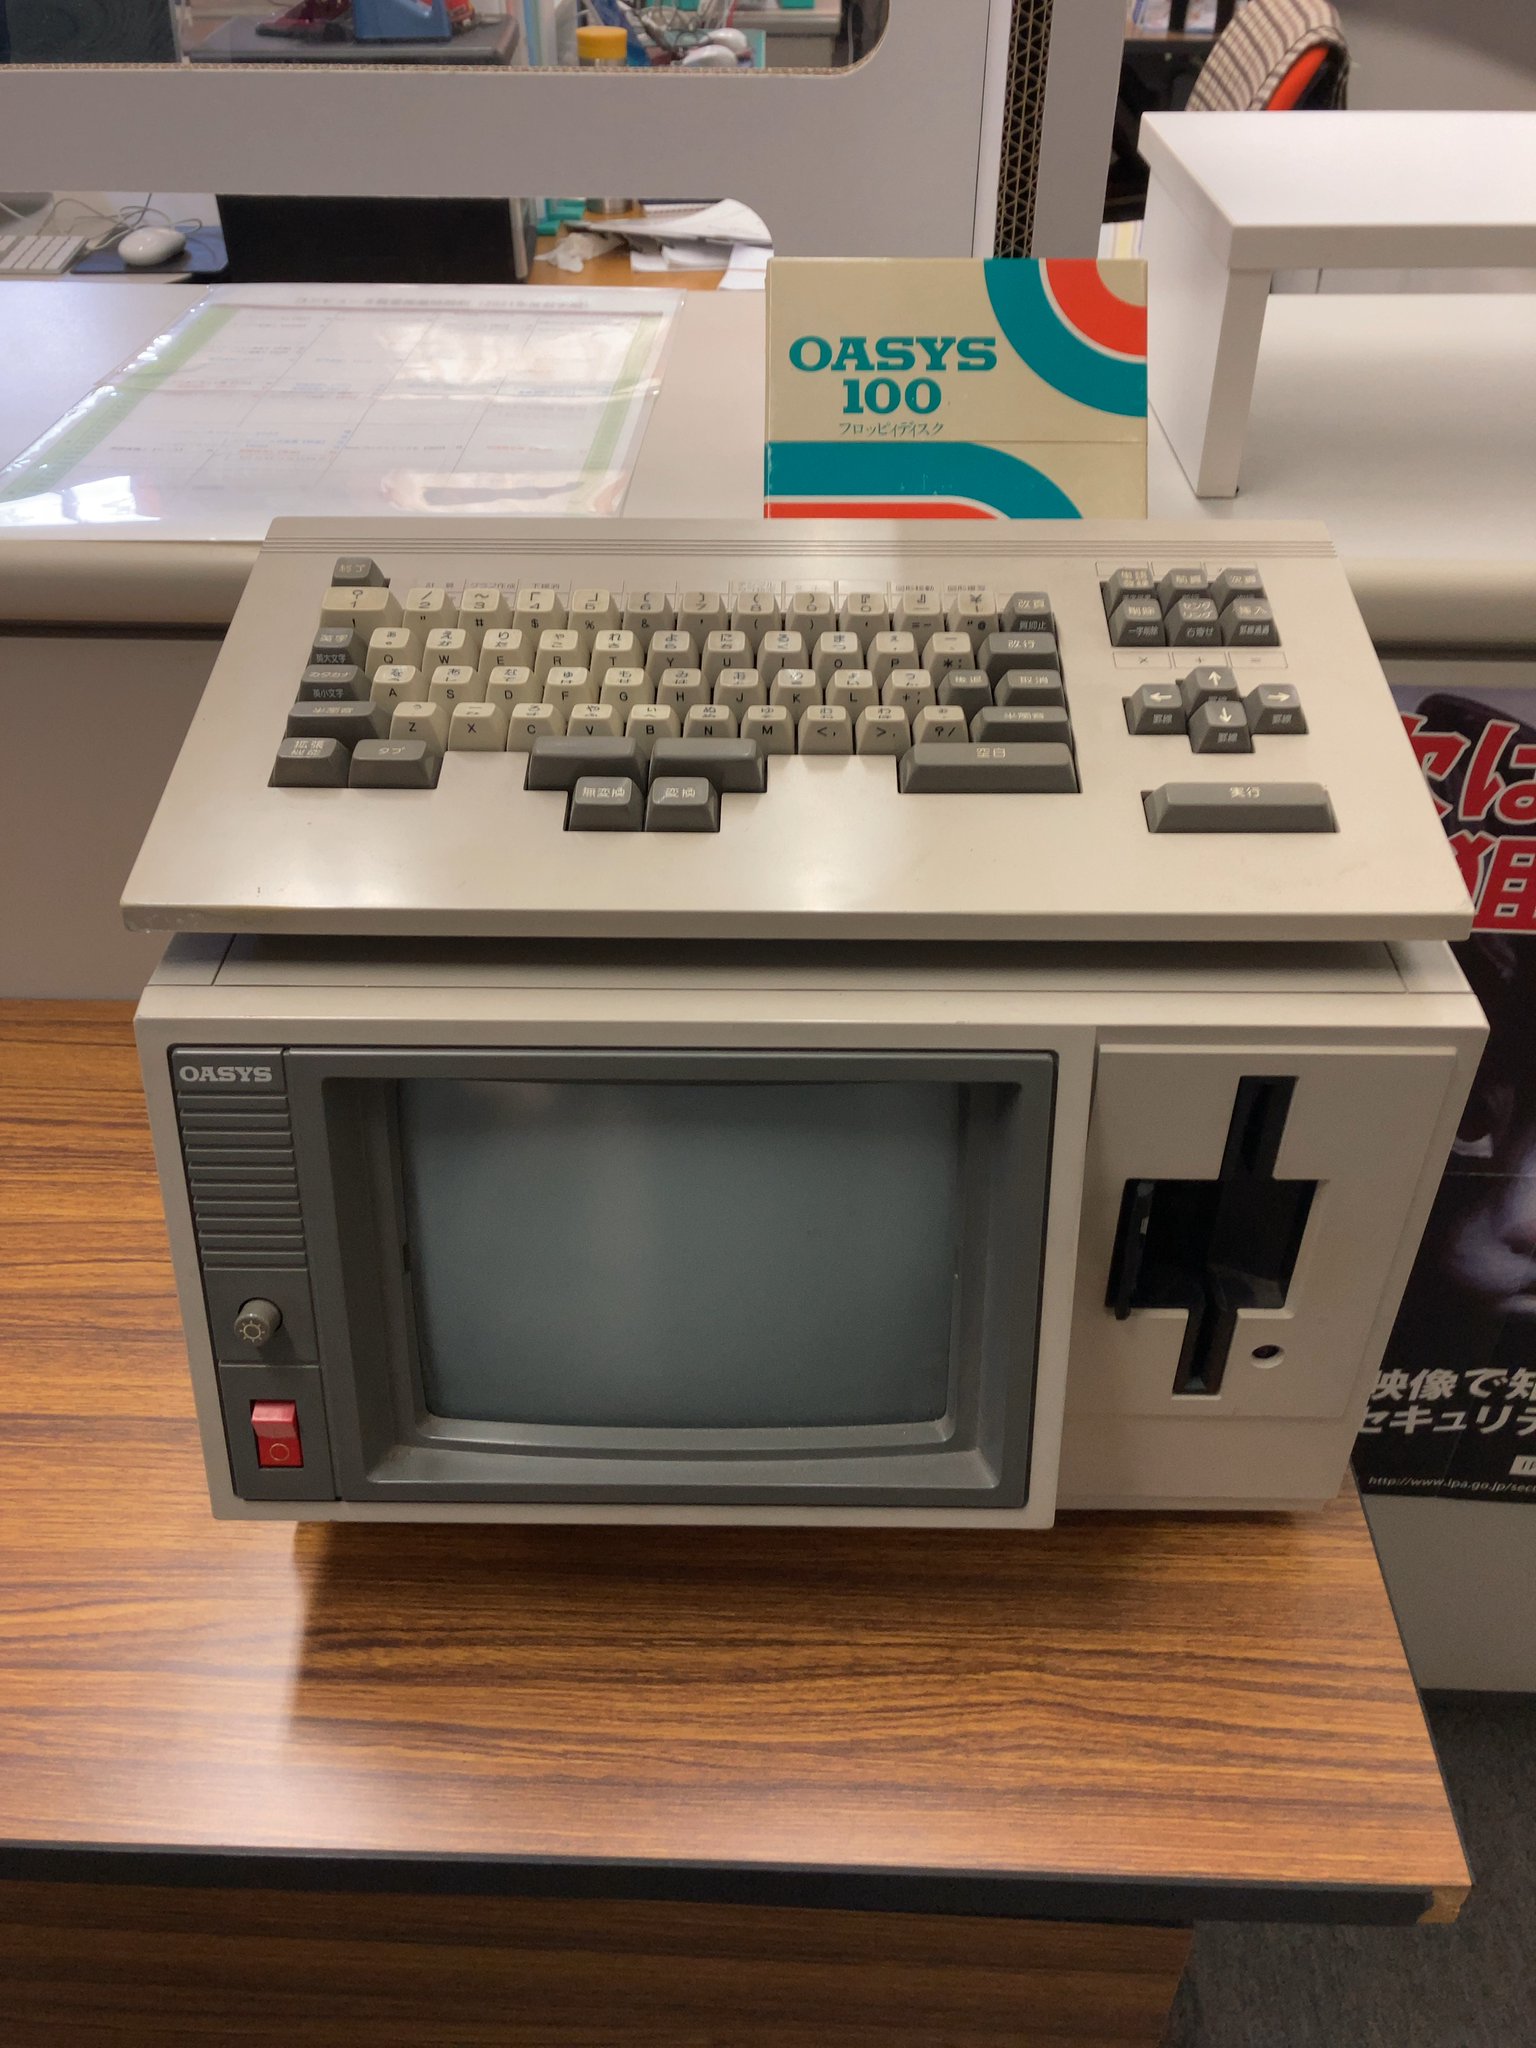 oasis 100 word processor 2021-05-25 4kqtH